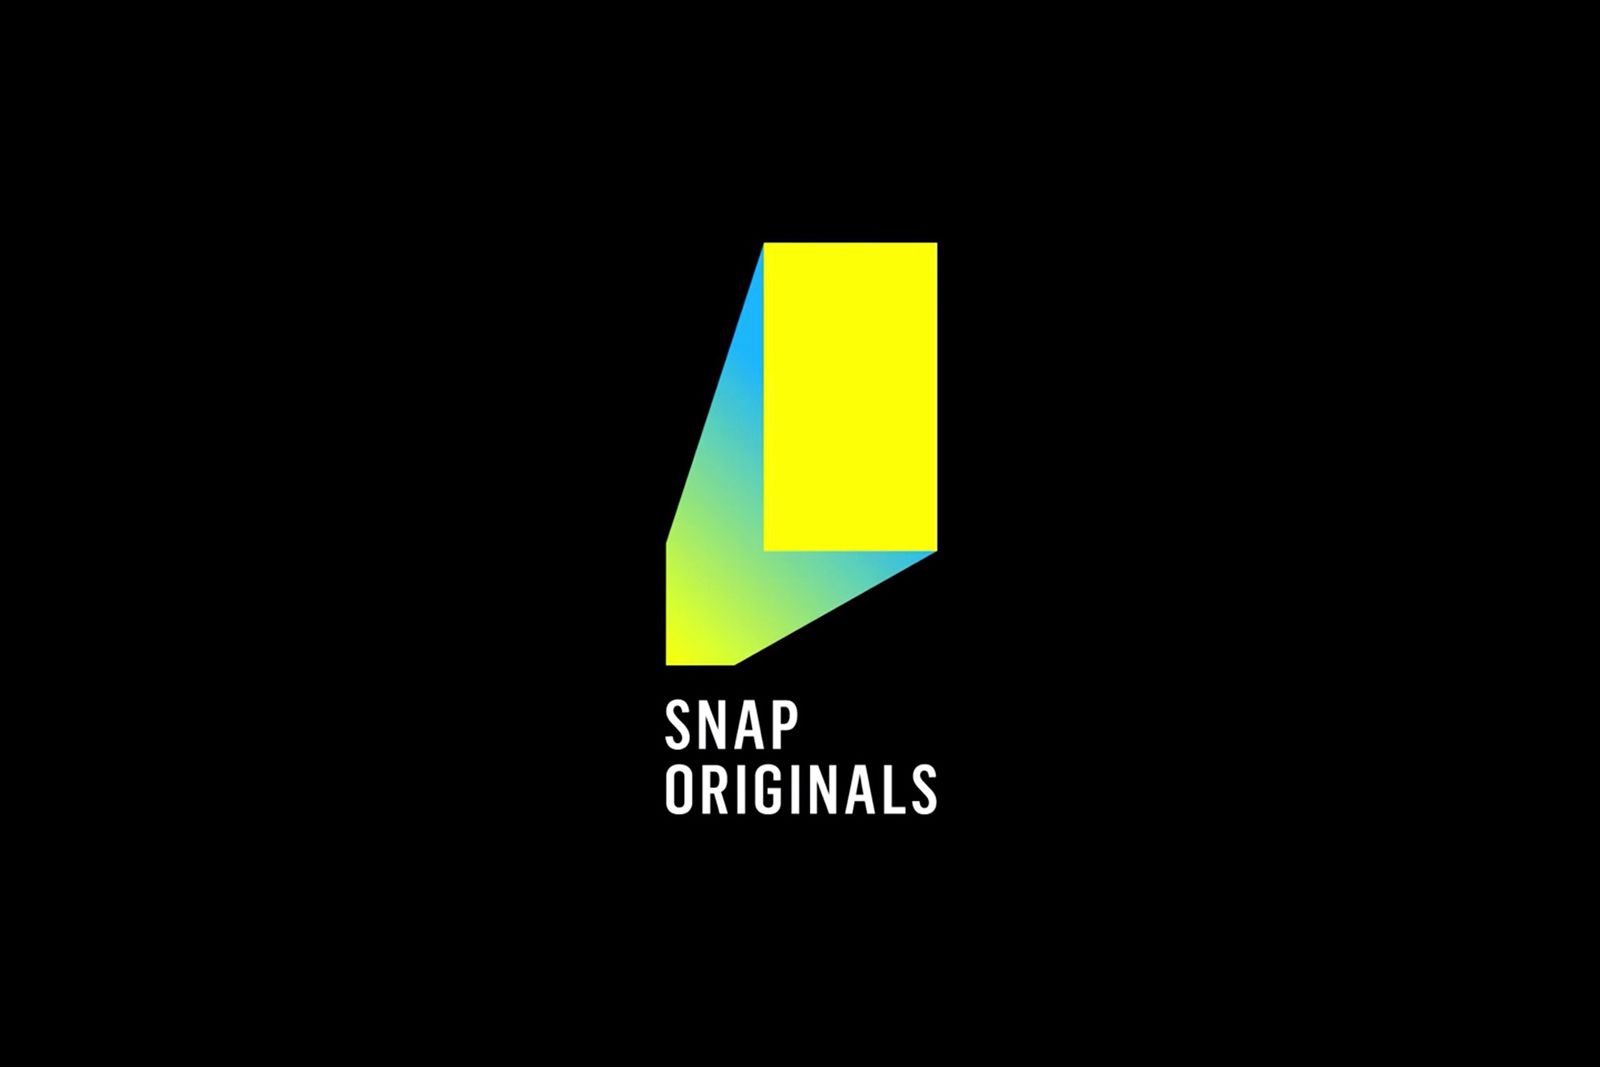 Snap Originals explained All the new original shows coming to Snapchat image 1